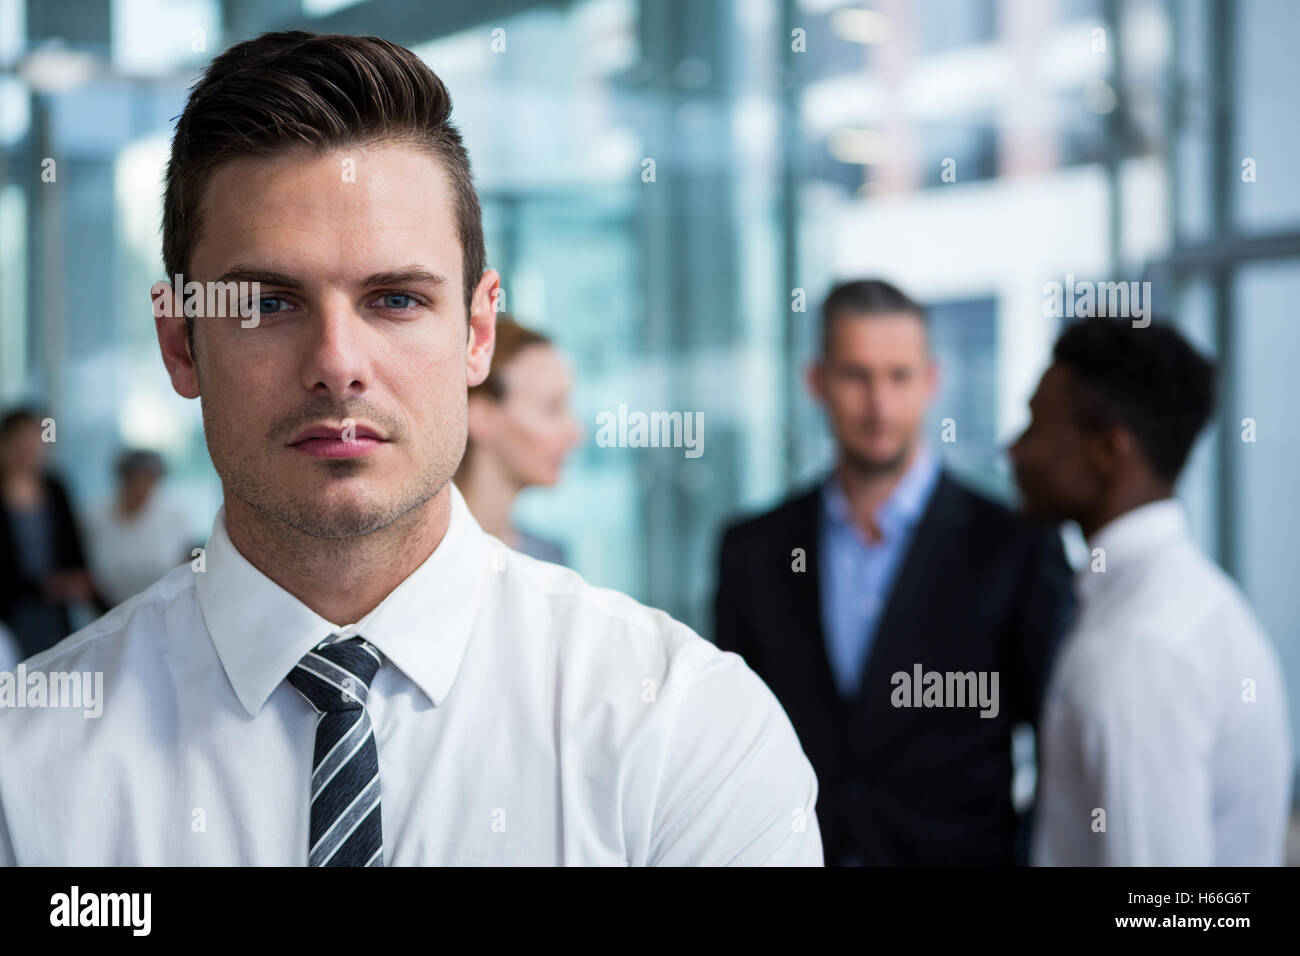 Businessman standing in office building Banque D'Images